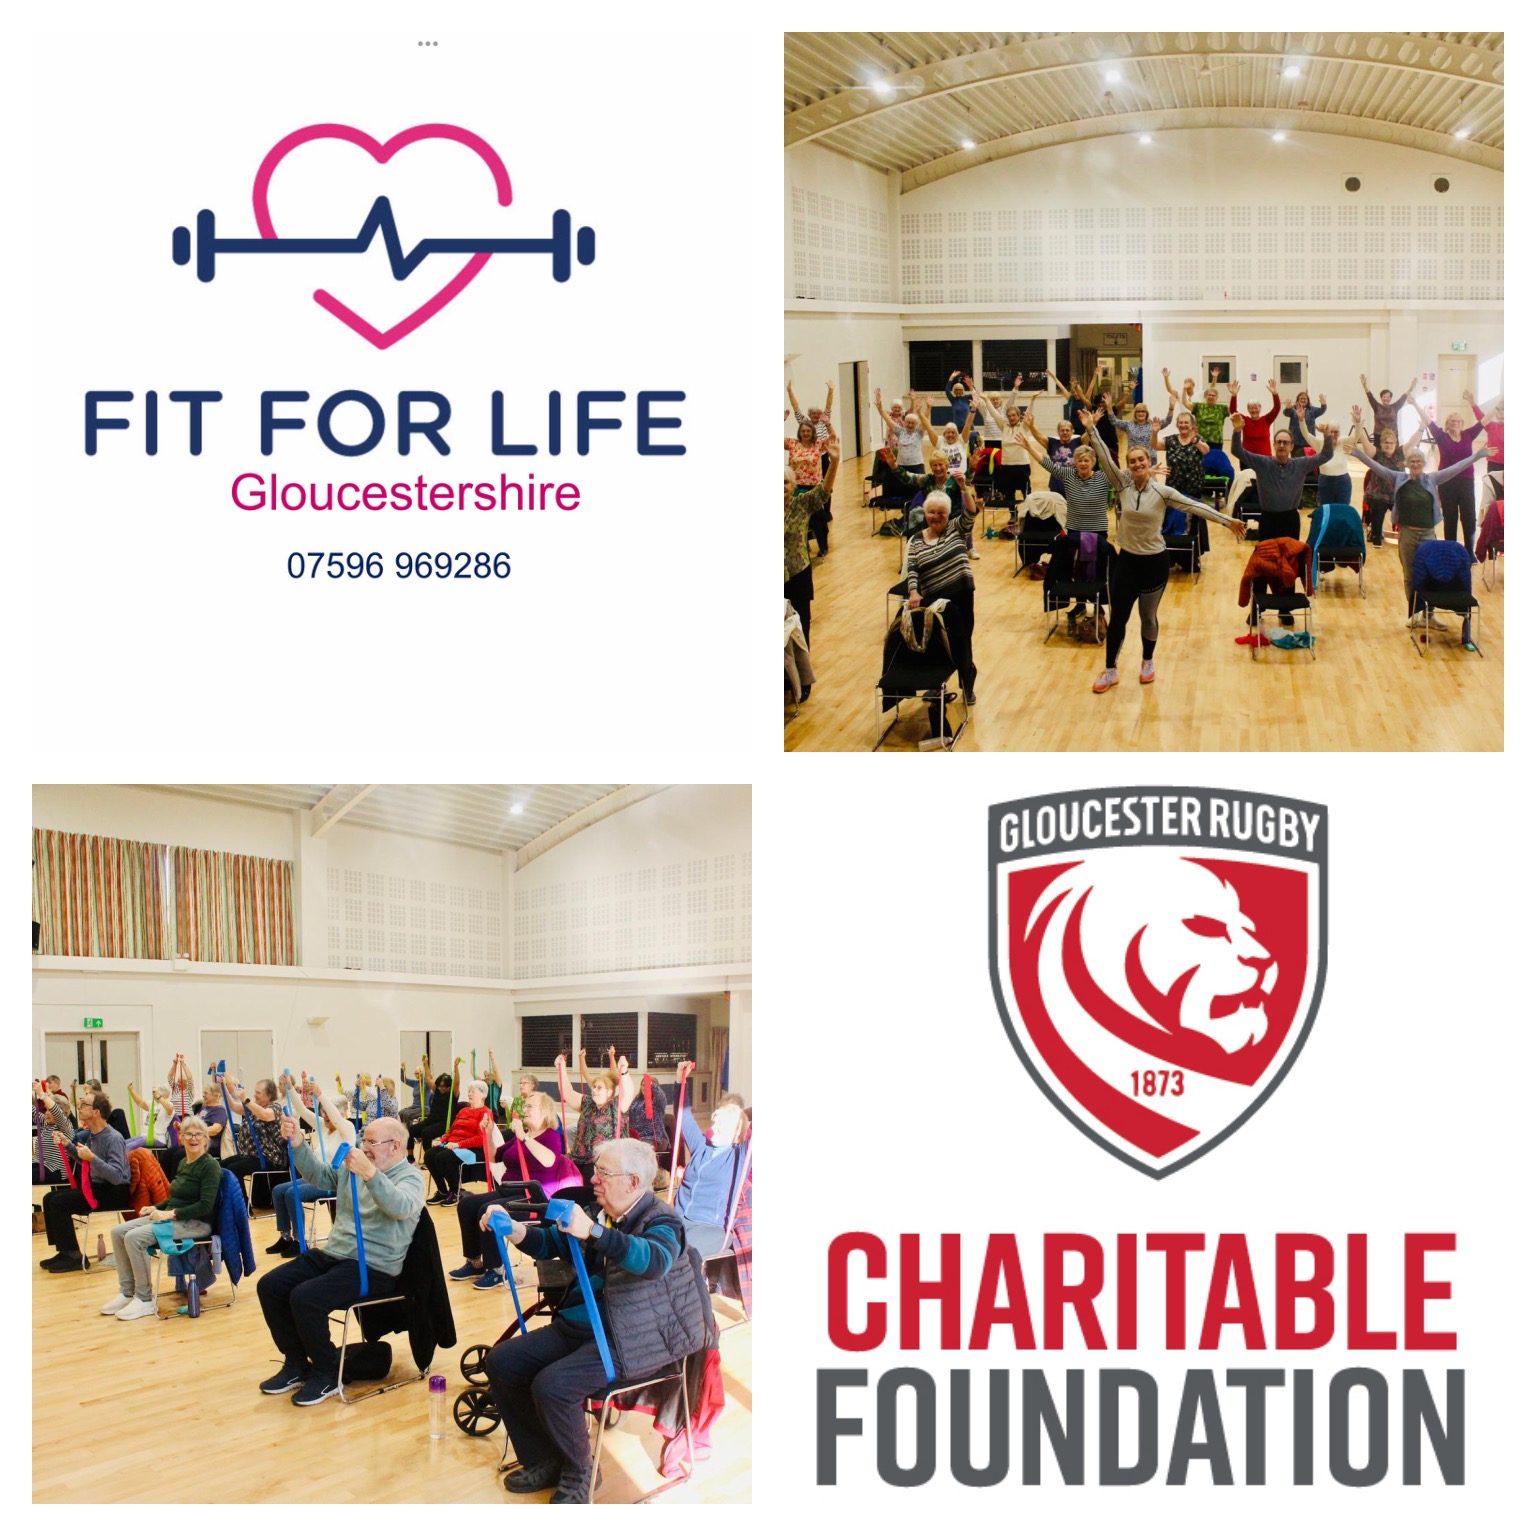 Fit for Life Gloucestershire